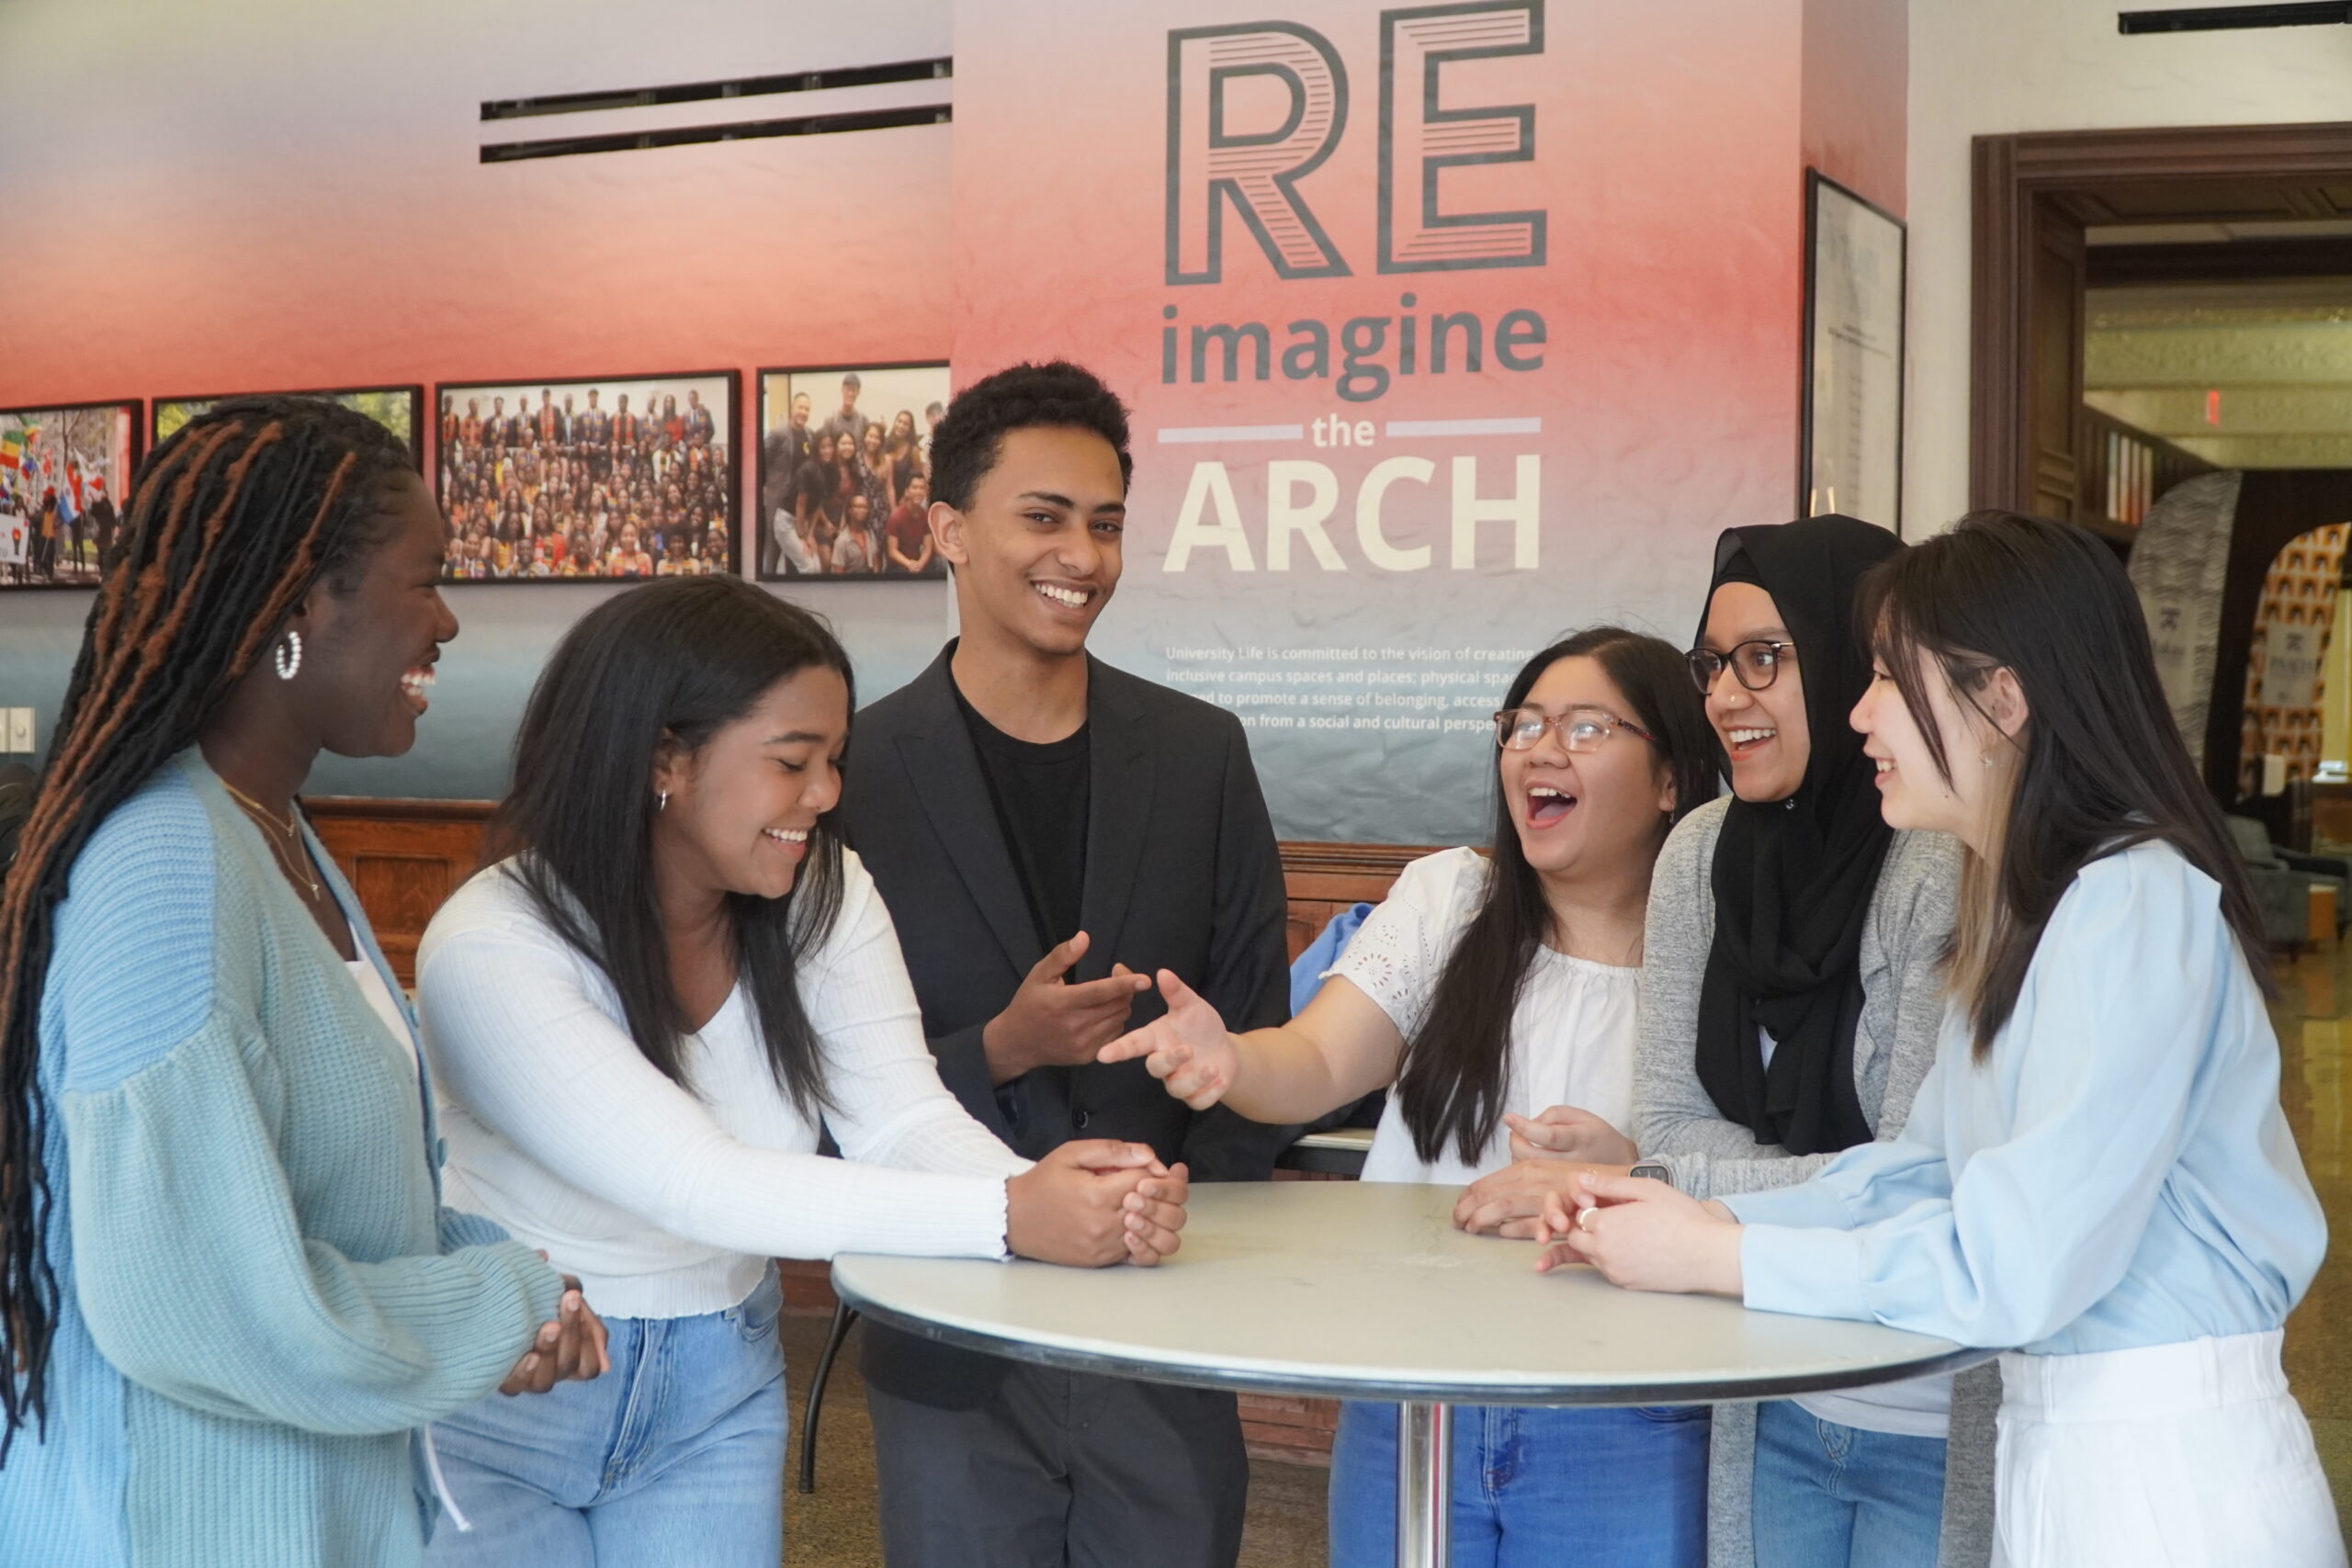 Groups of six diverse students standing around a table laughing at a joke